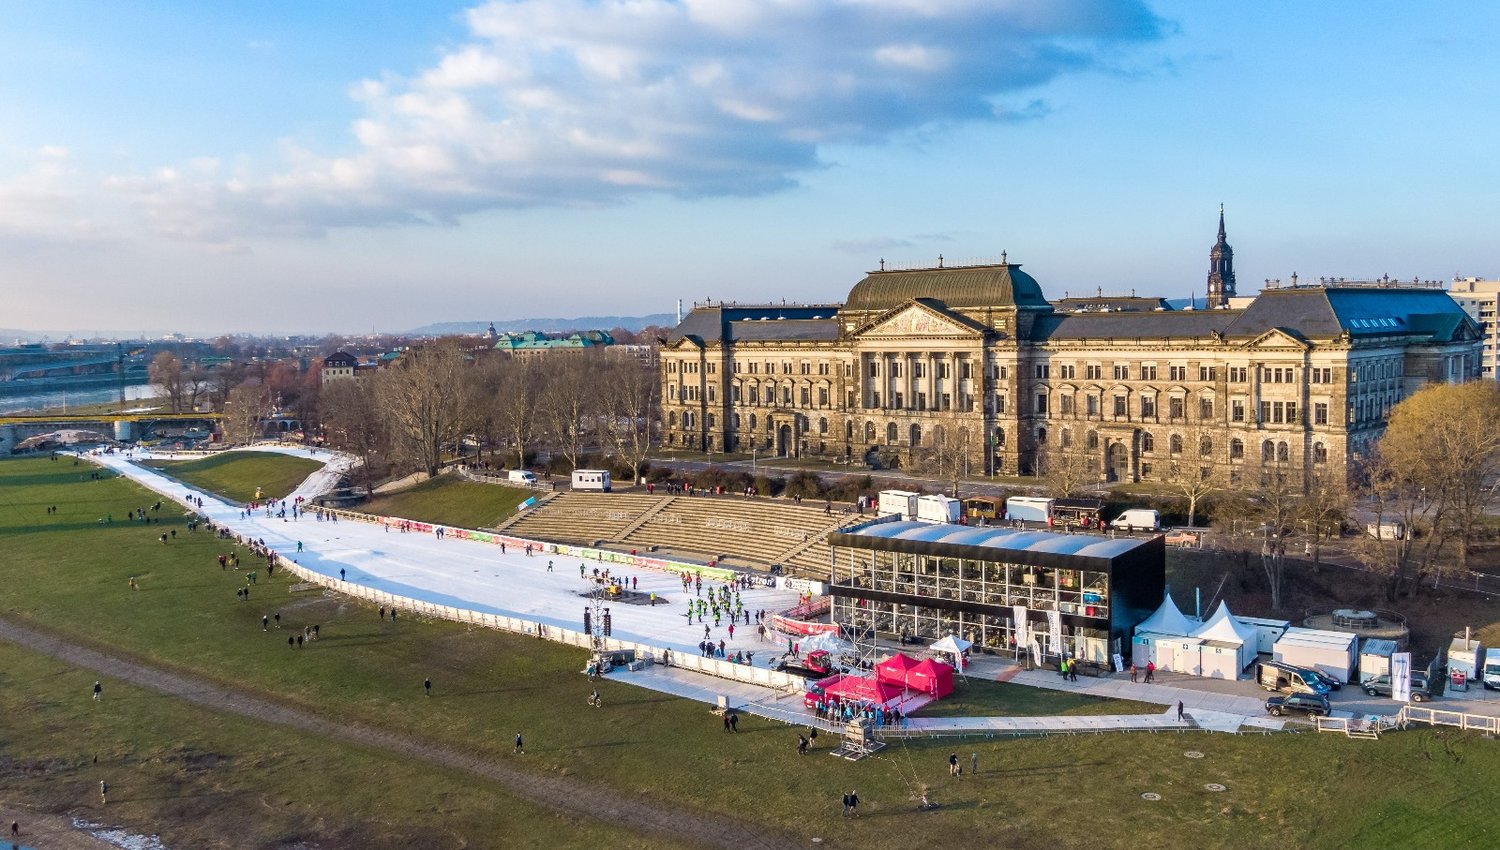 Aerial view of the race course in front of the State of Saxony’s Ministry of Culture building.